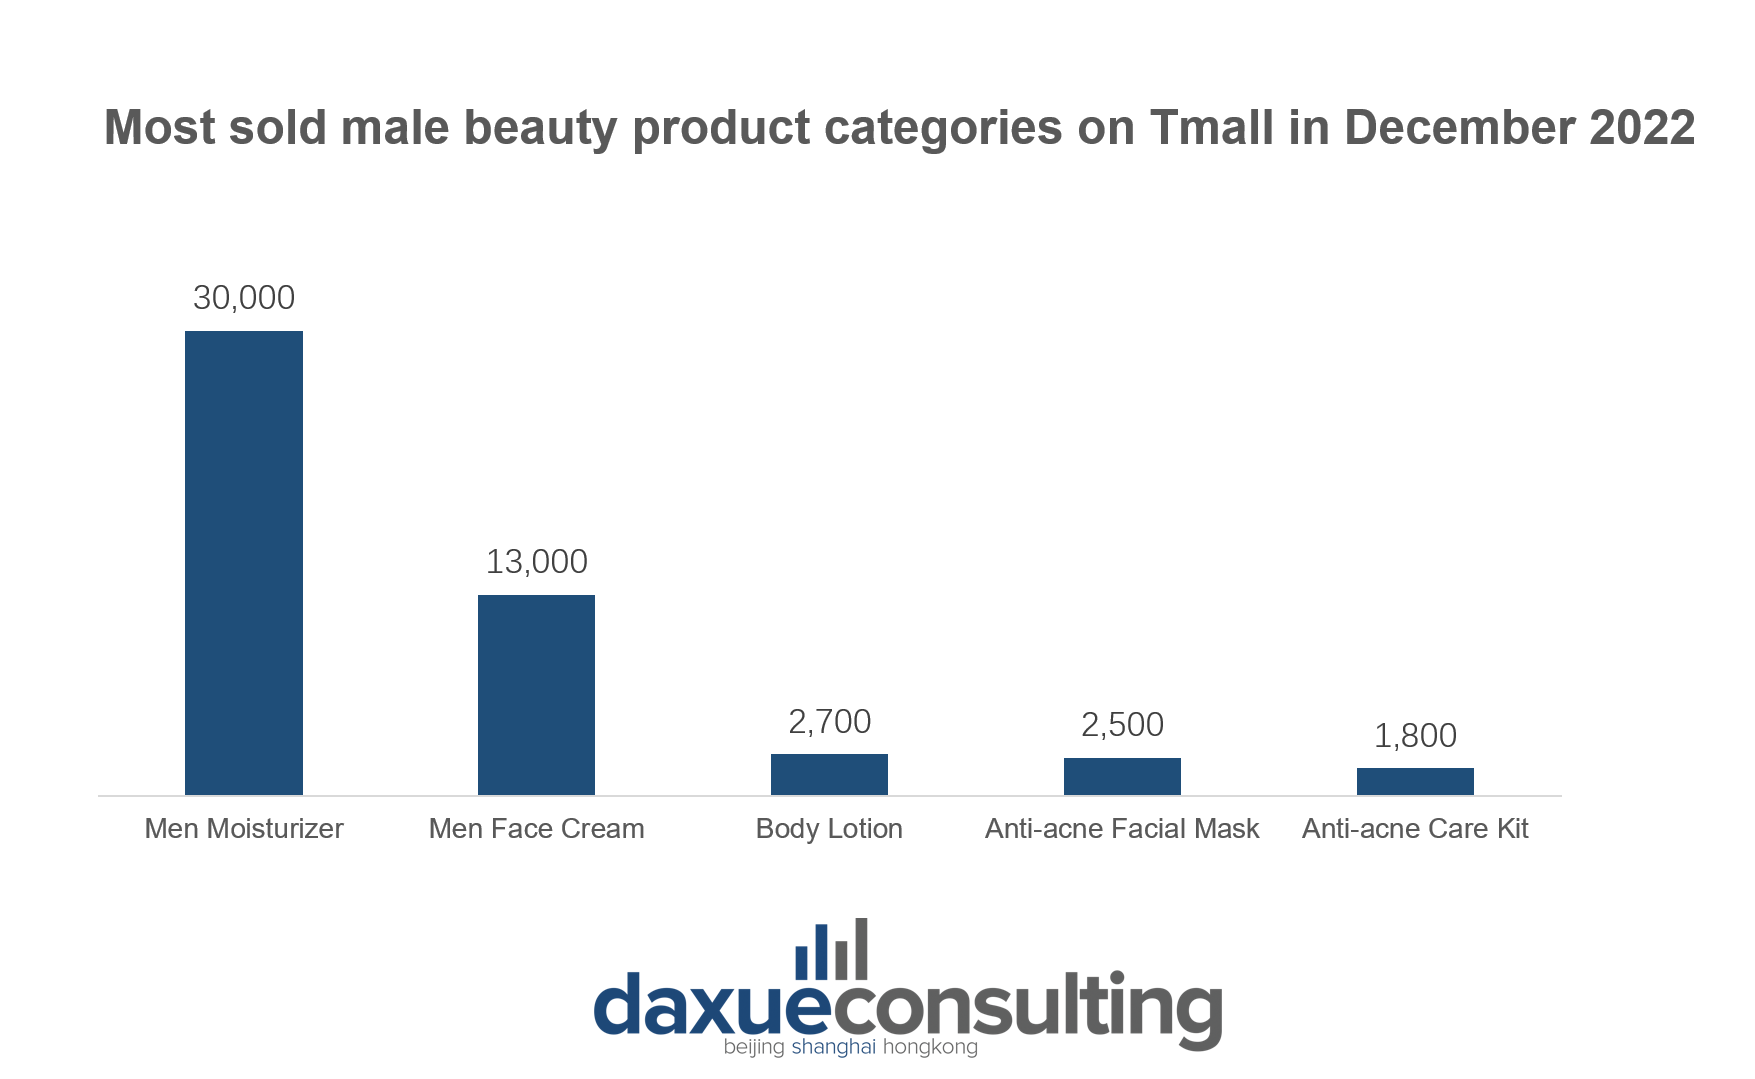 Most sold male beauty product categories on Tmall in December 2022